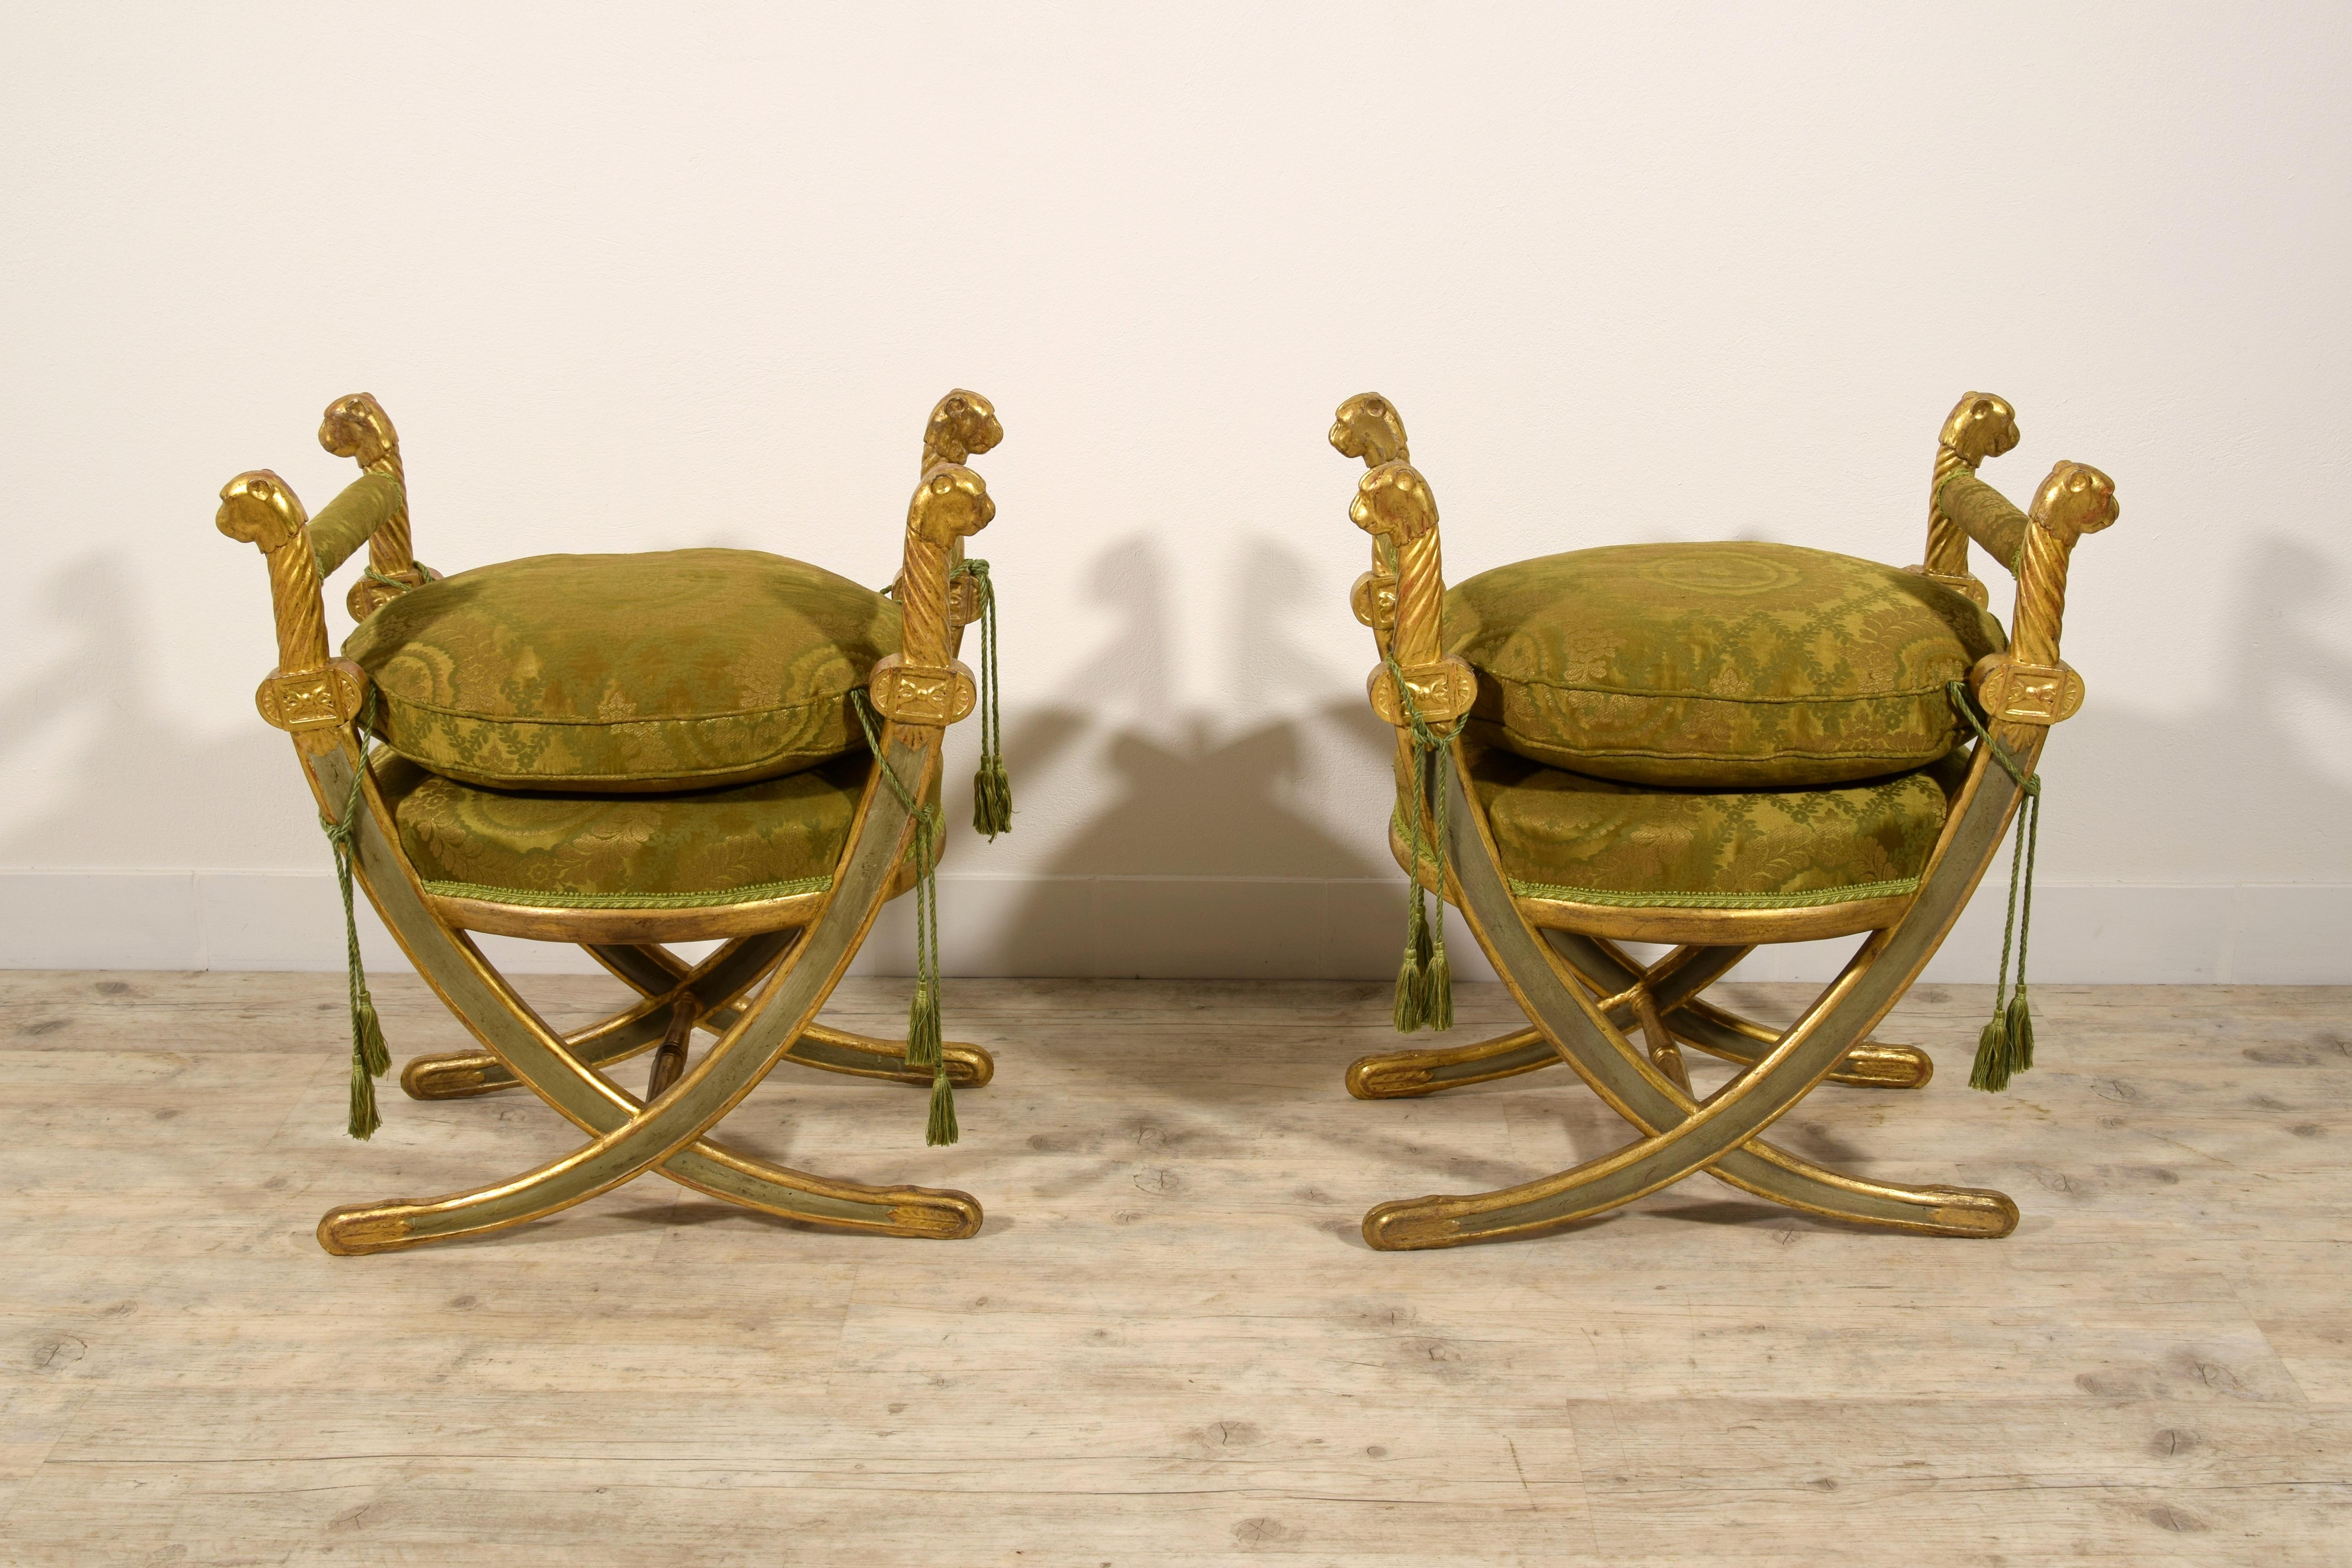 20th Century, Pair of Neoclassical Italian Carved Lacquered Gilt Wood Stools For Sale 3